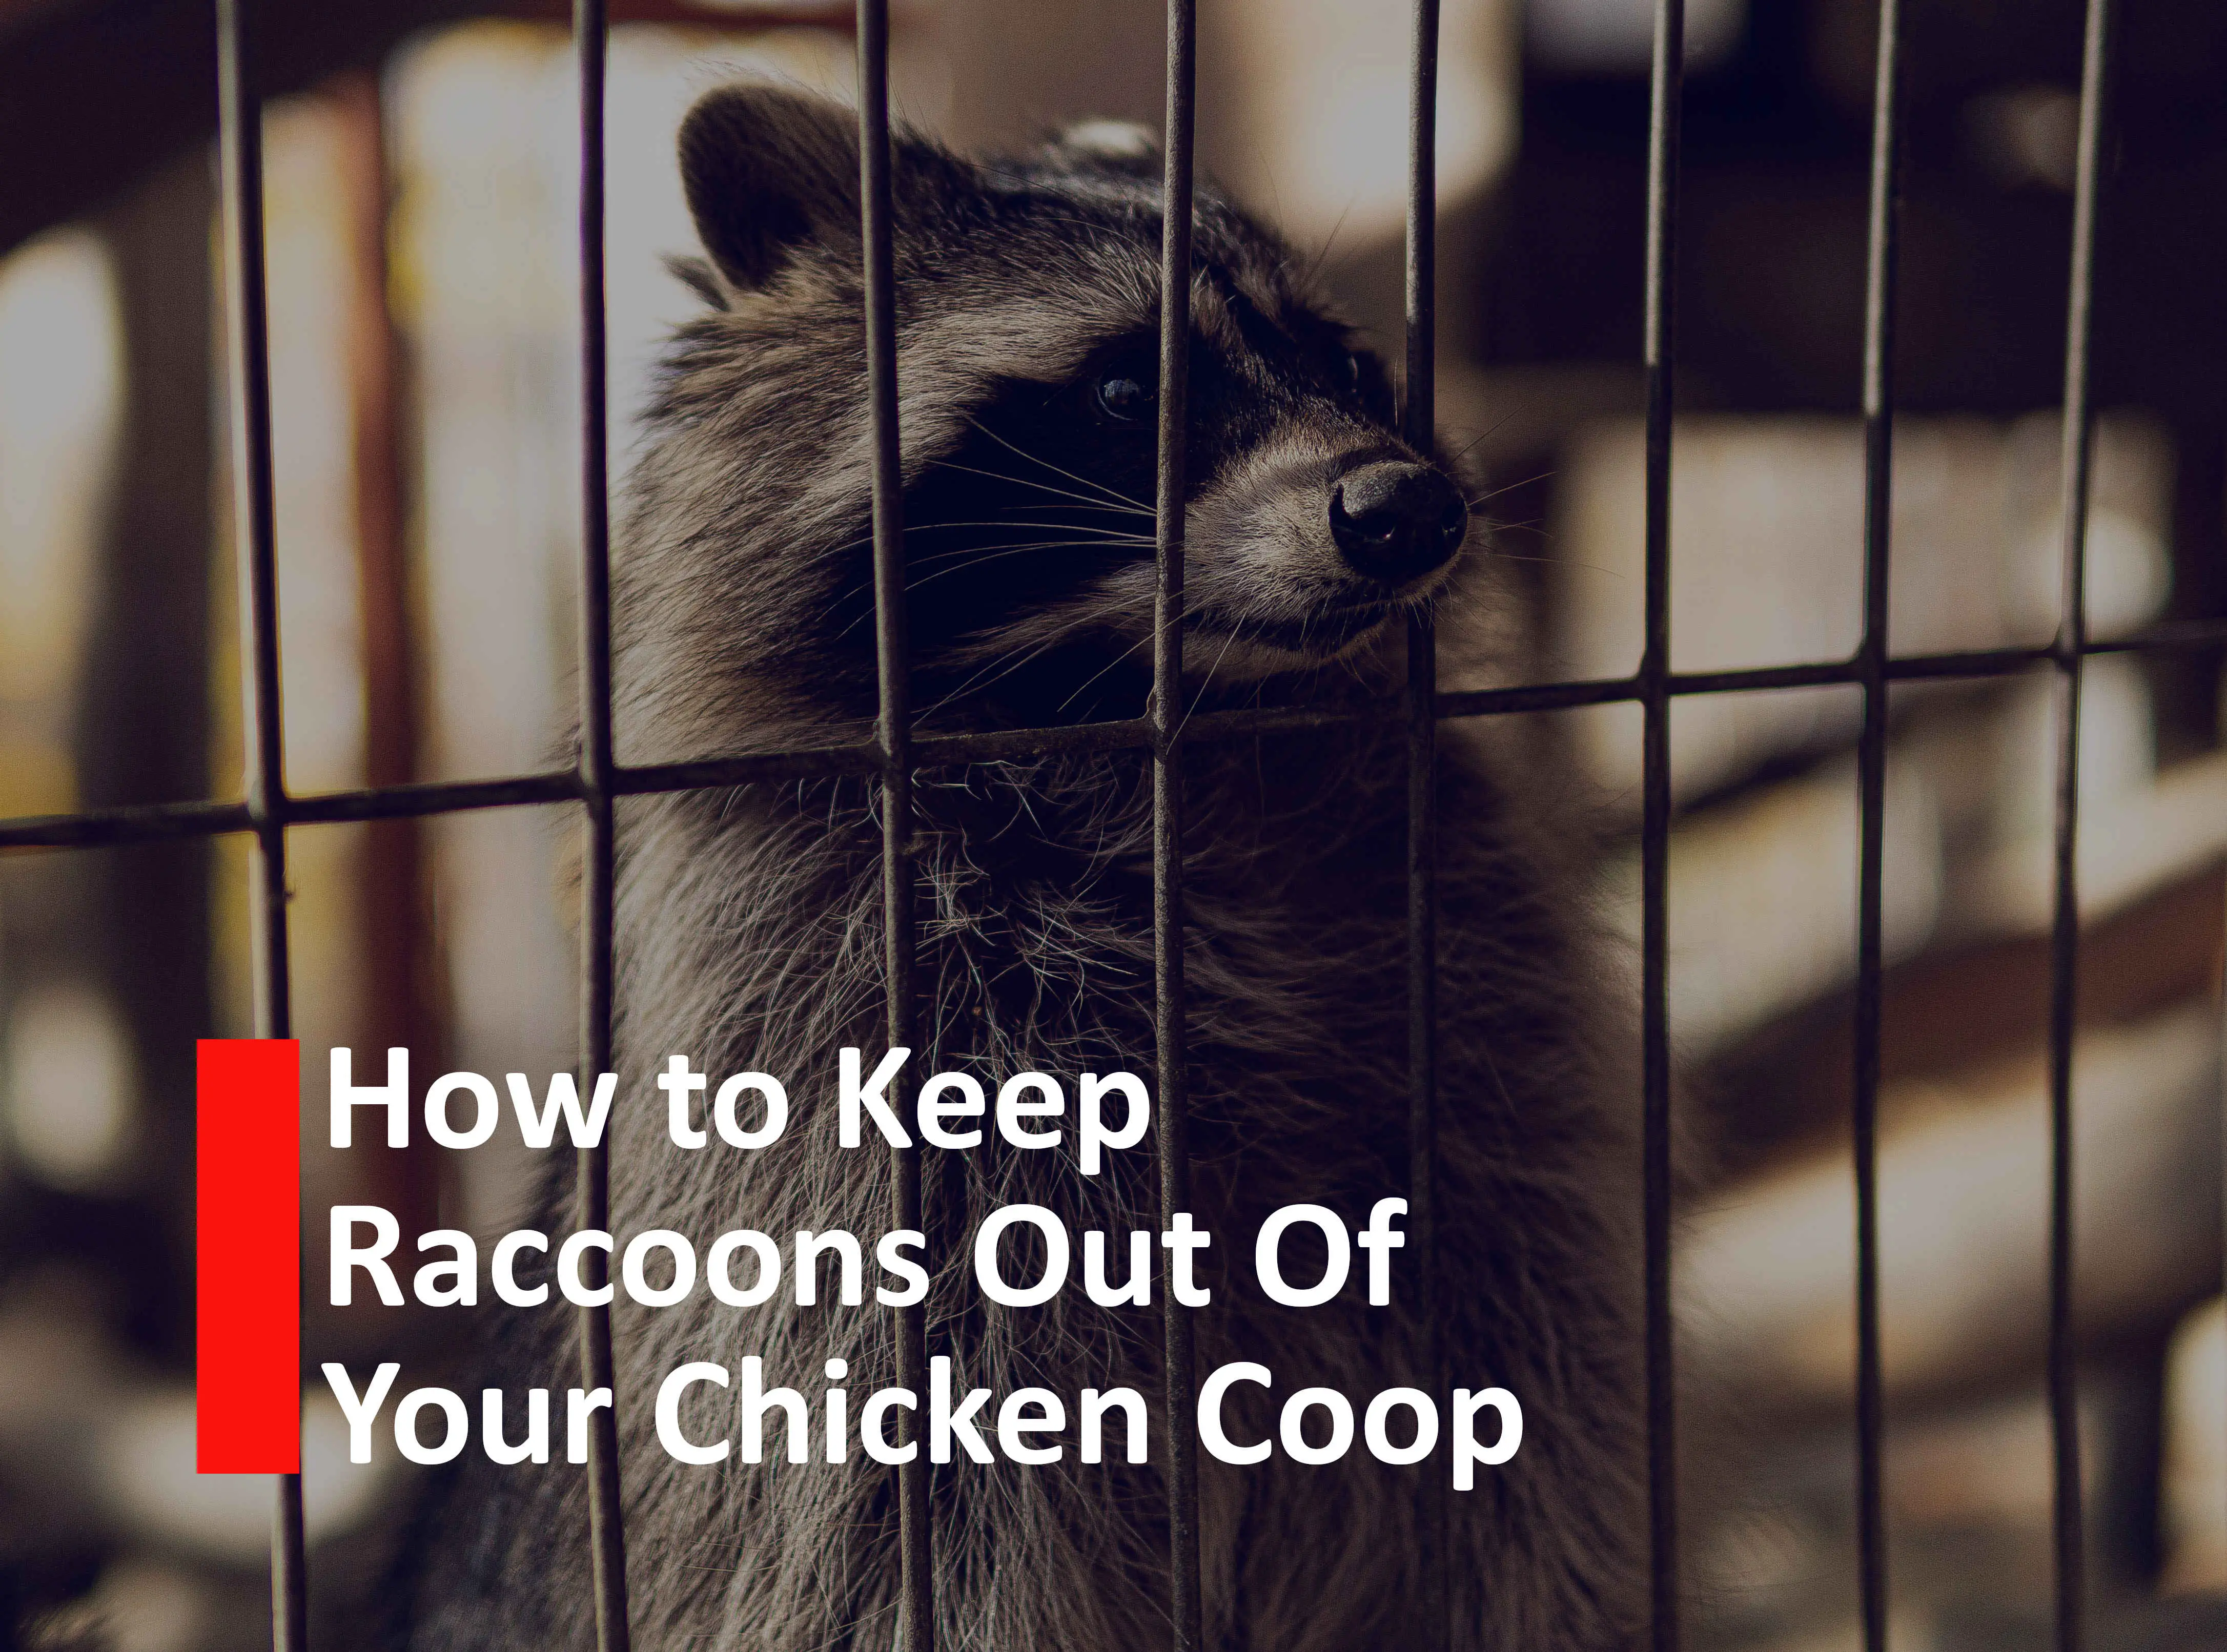 How to Keep Raccoons out of your chicken coop